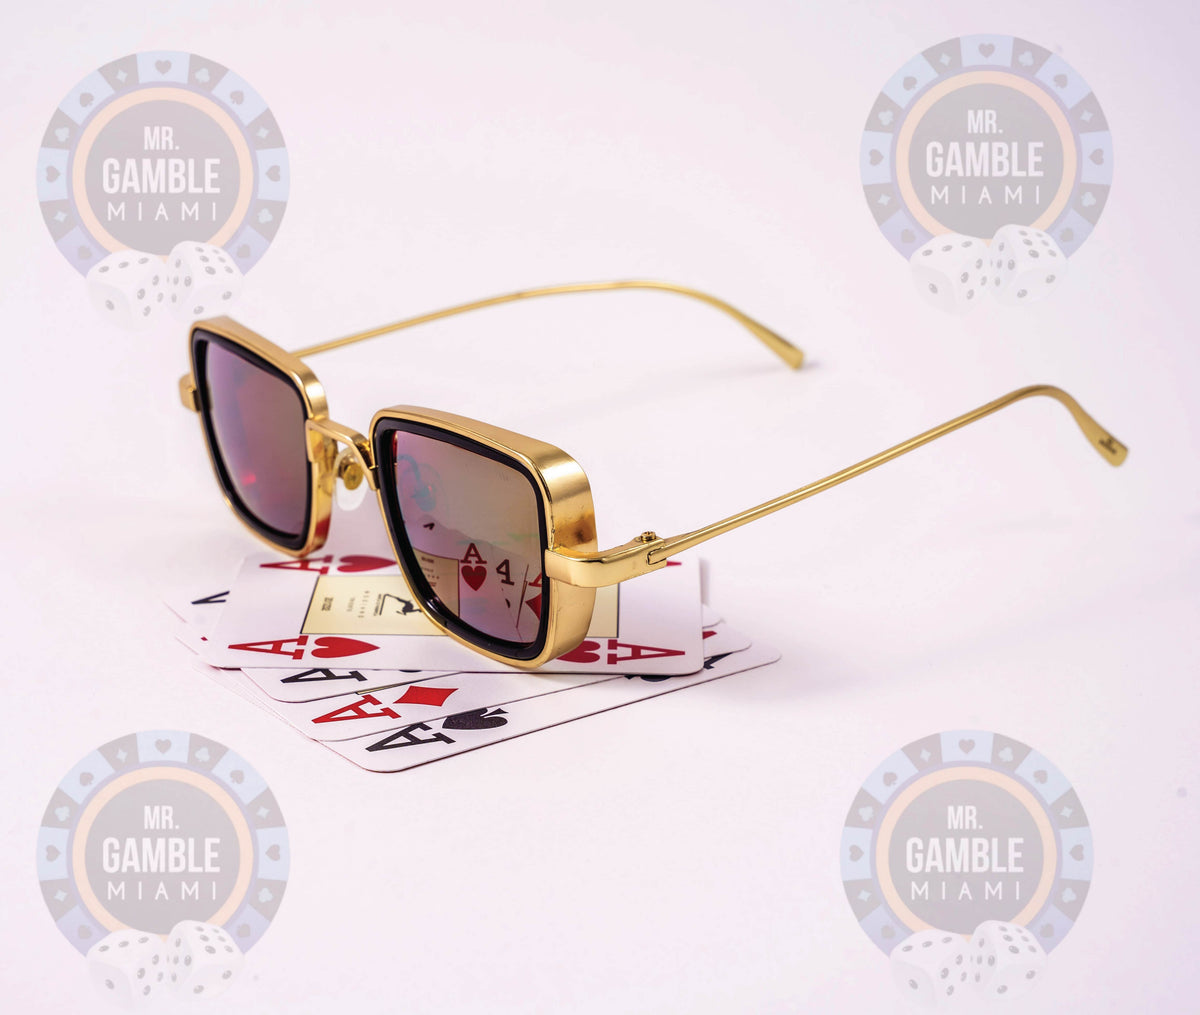 Poker Cheating Sunglasses Model 1 For Infrared Marked Playing Cards